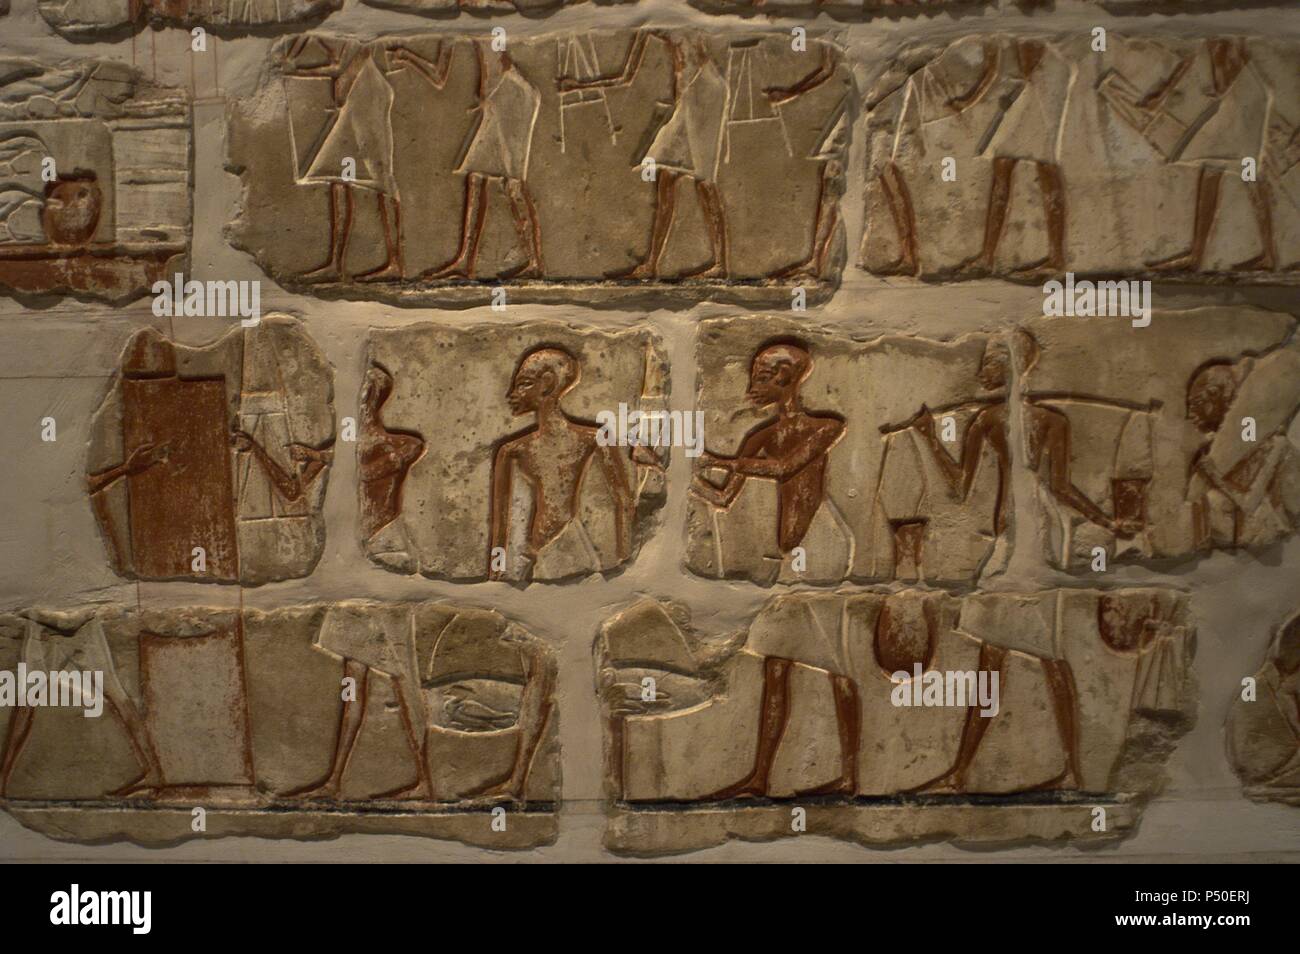 Egyptian art. Talatat walls from the temple of Amenhotep IV. Composed of 283 blocks of polychromed sandstone. Storage of goods in the temple. 18th Dynasty. New Empire. Luxor Museum. Egypt. Stock Photo